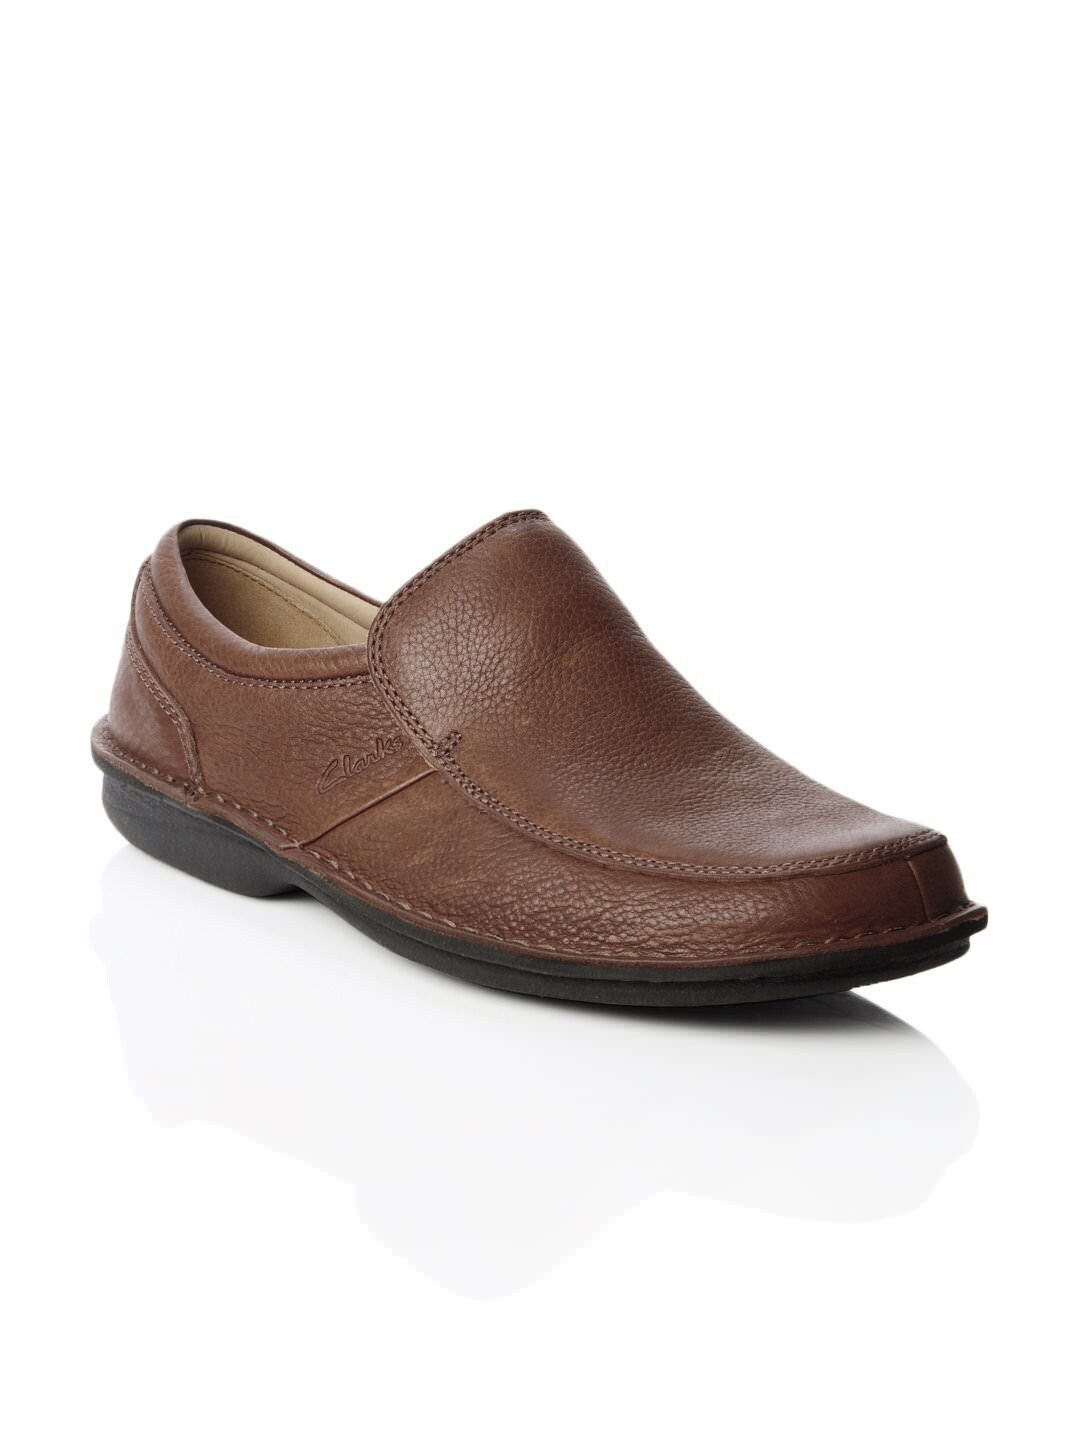 Clarks Men Sentry Slip Mahogany Leather Brown Shoes